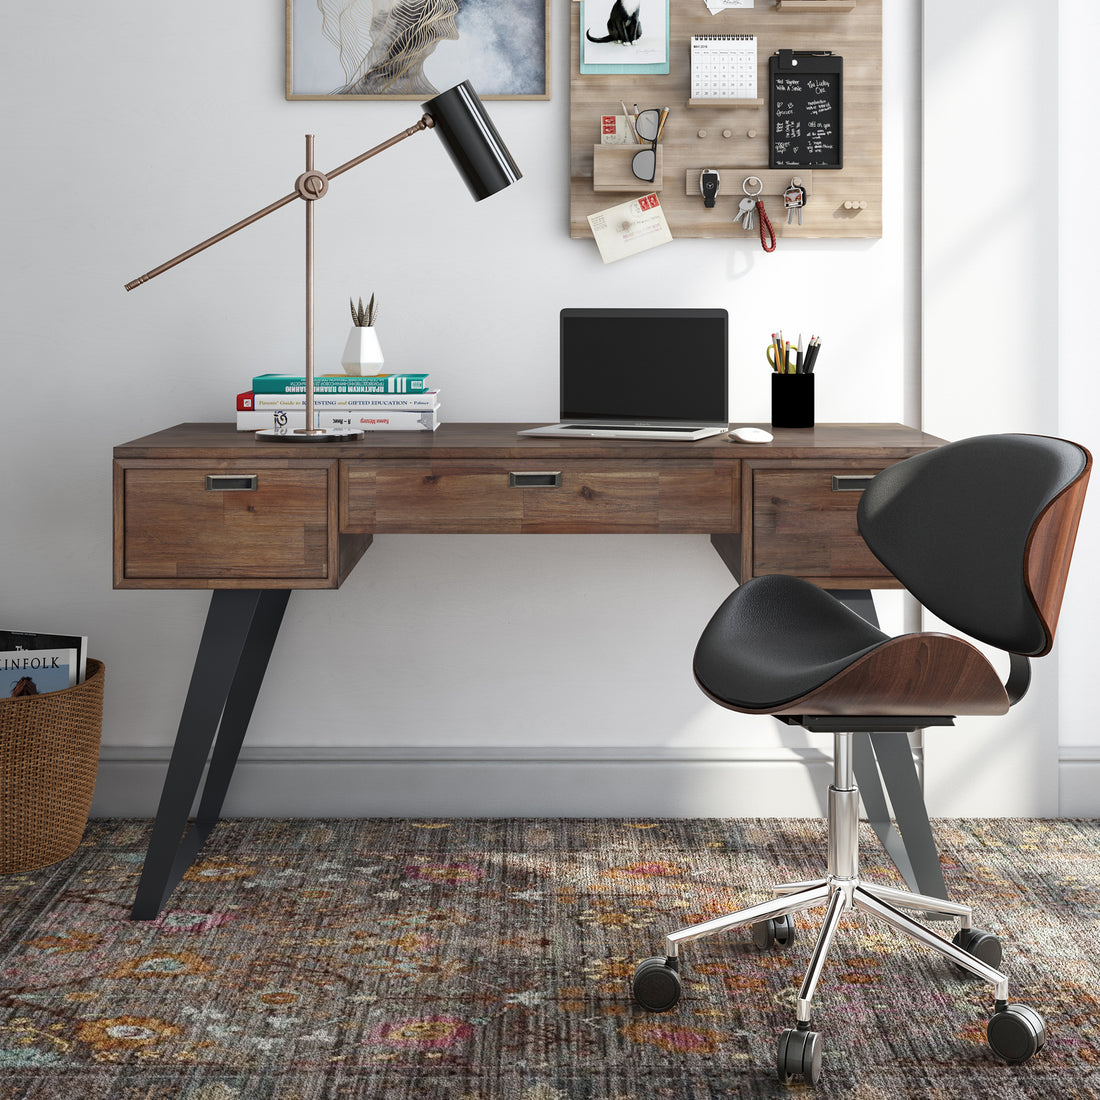 4 Furniture Pieces to Create a Trendy Home Office